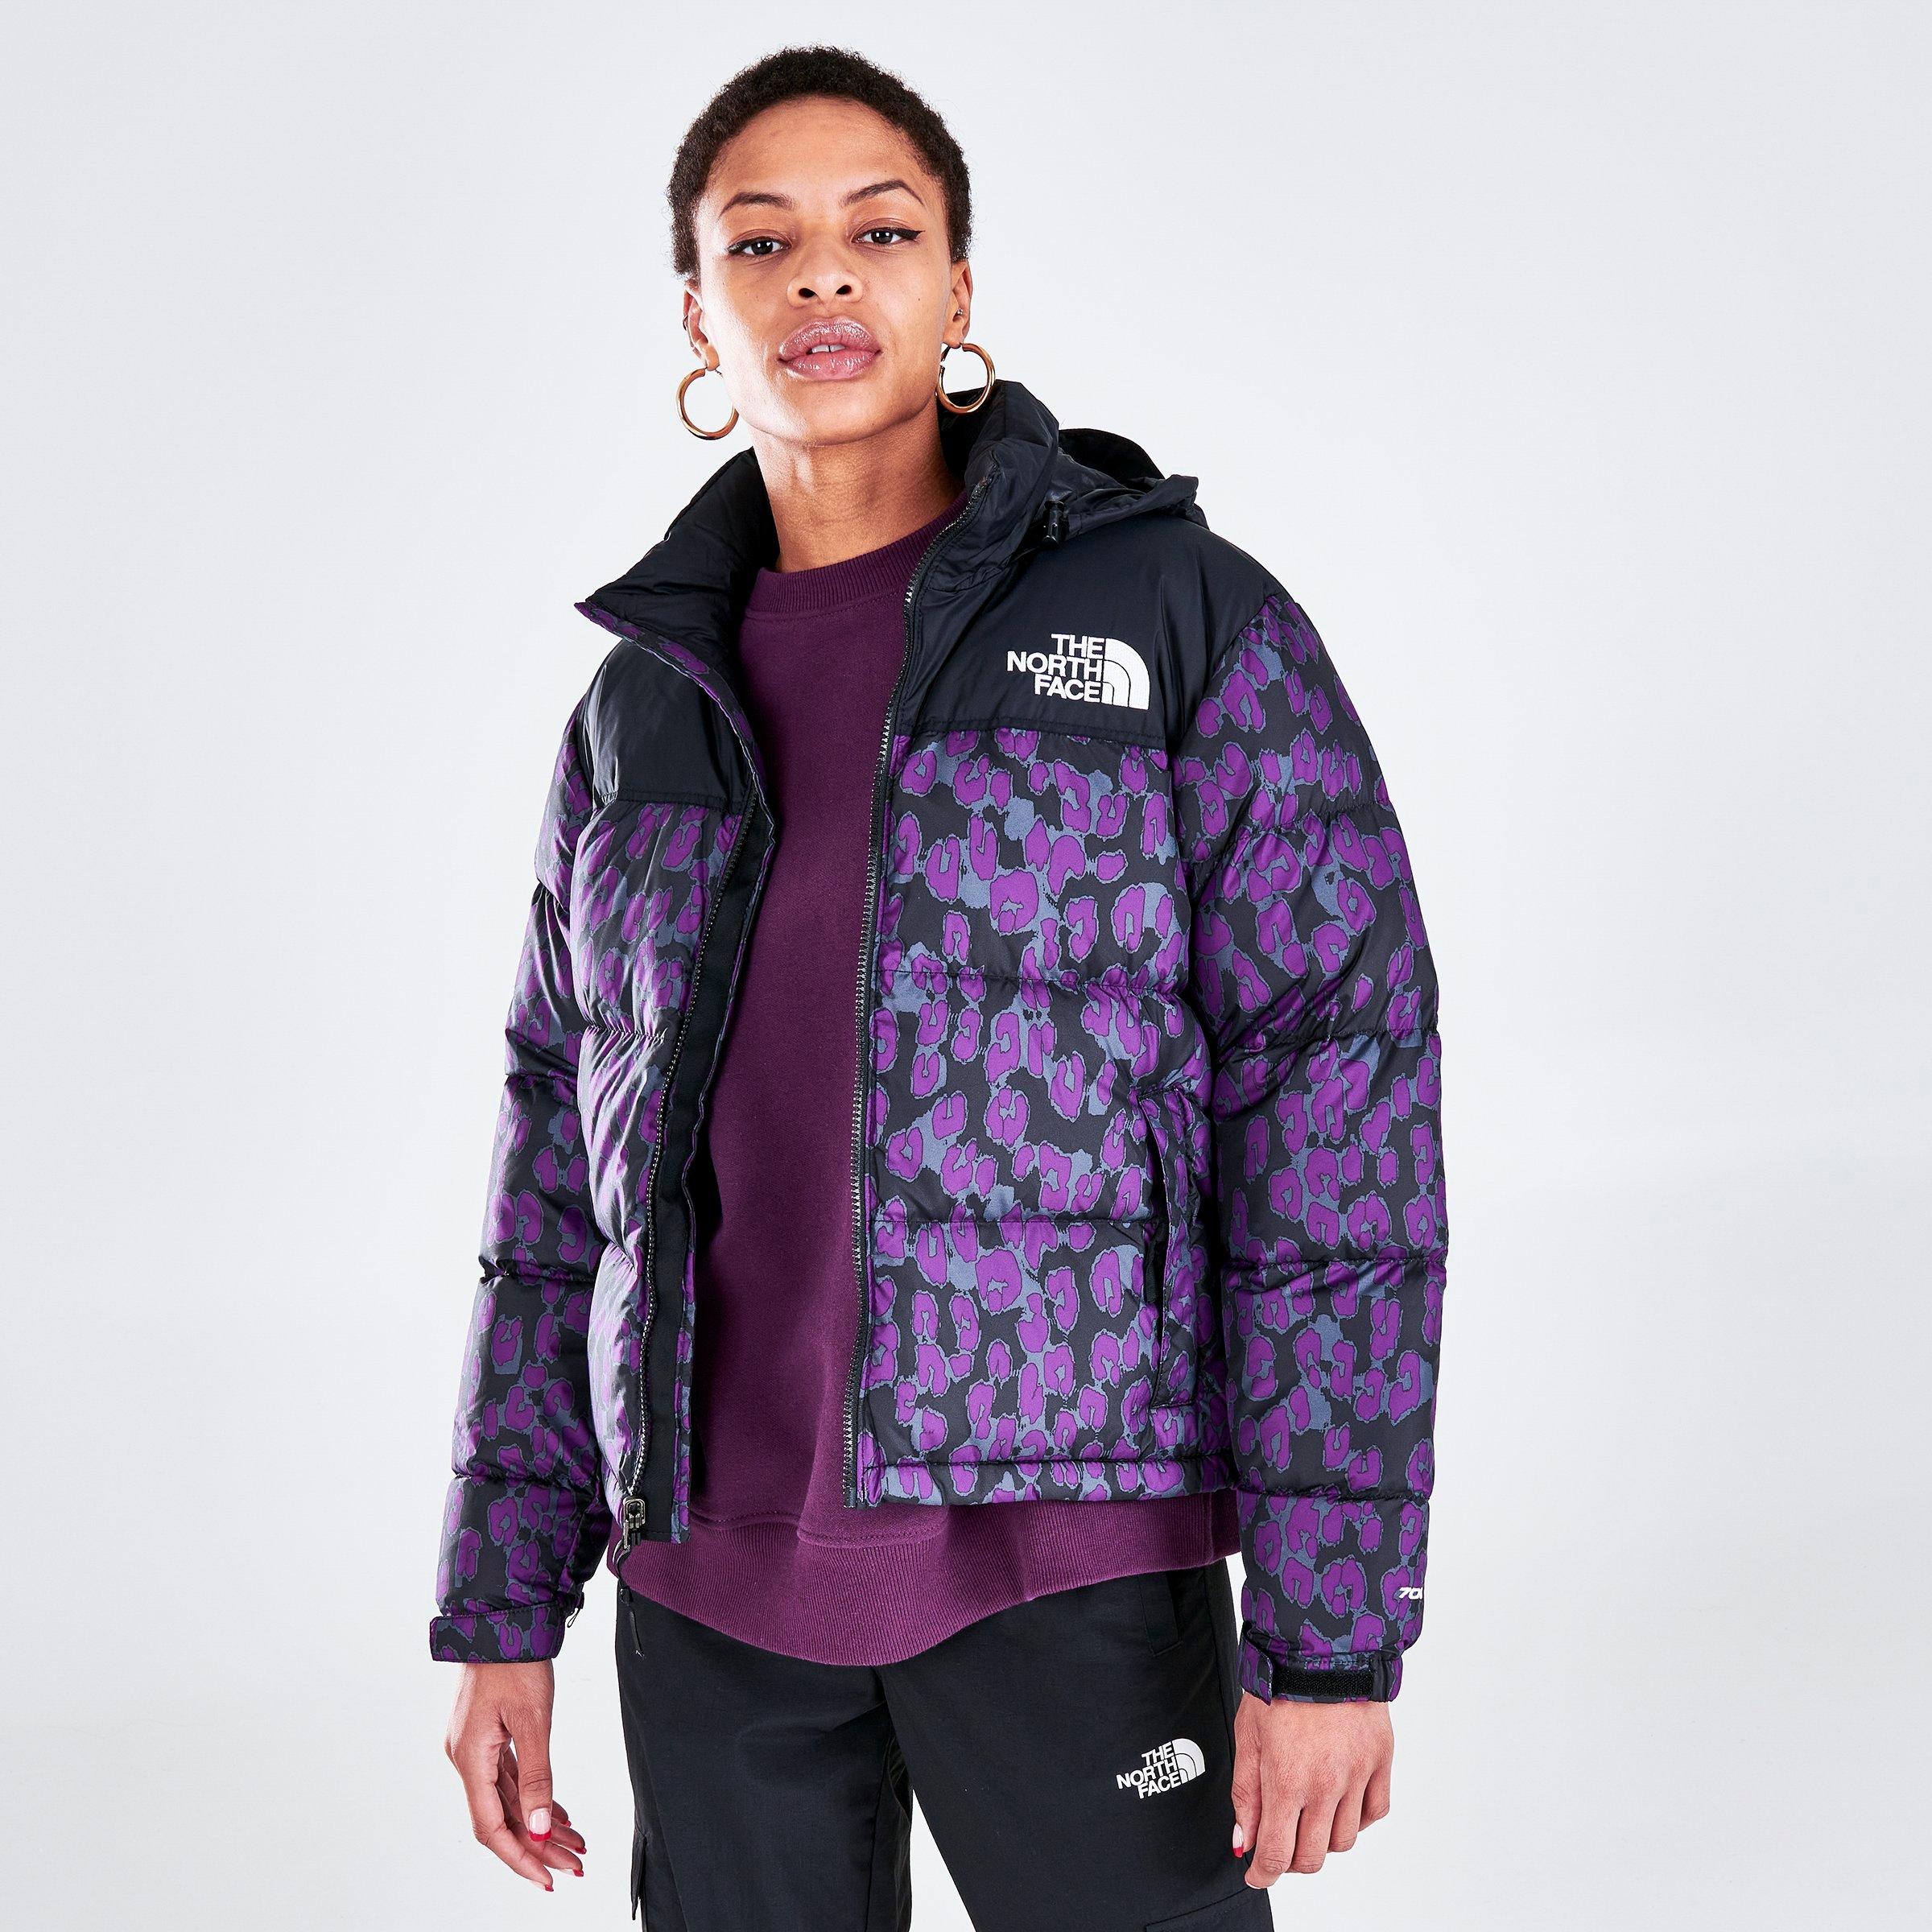 Shop The North Face Inc Merchandise on Earth Shop